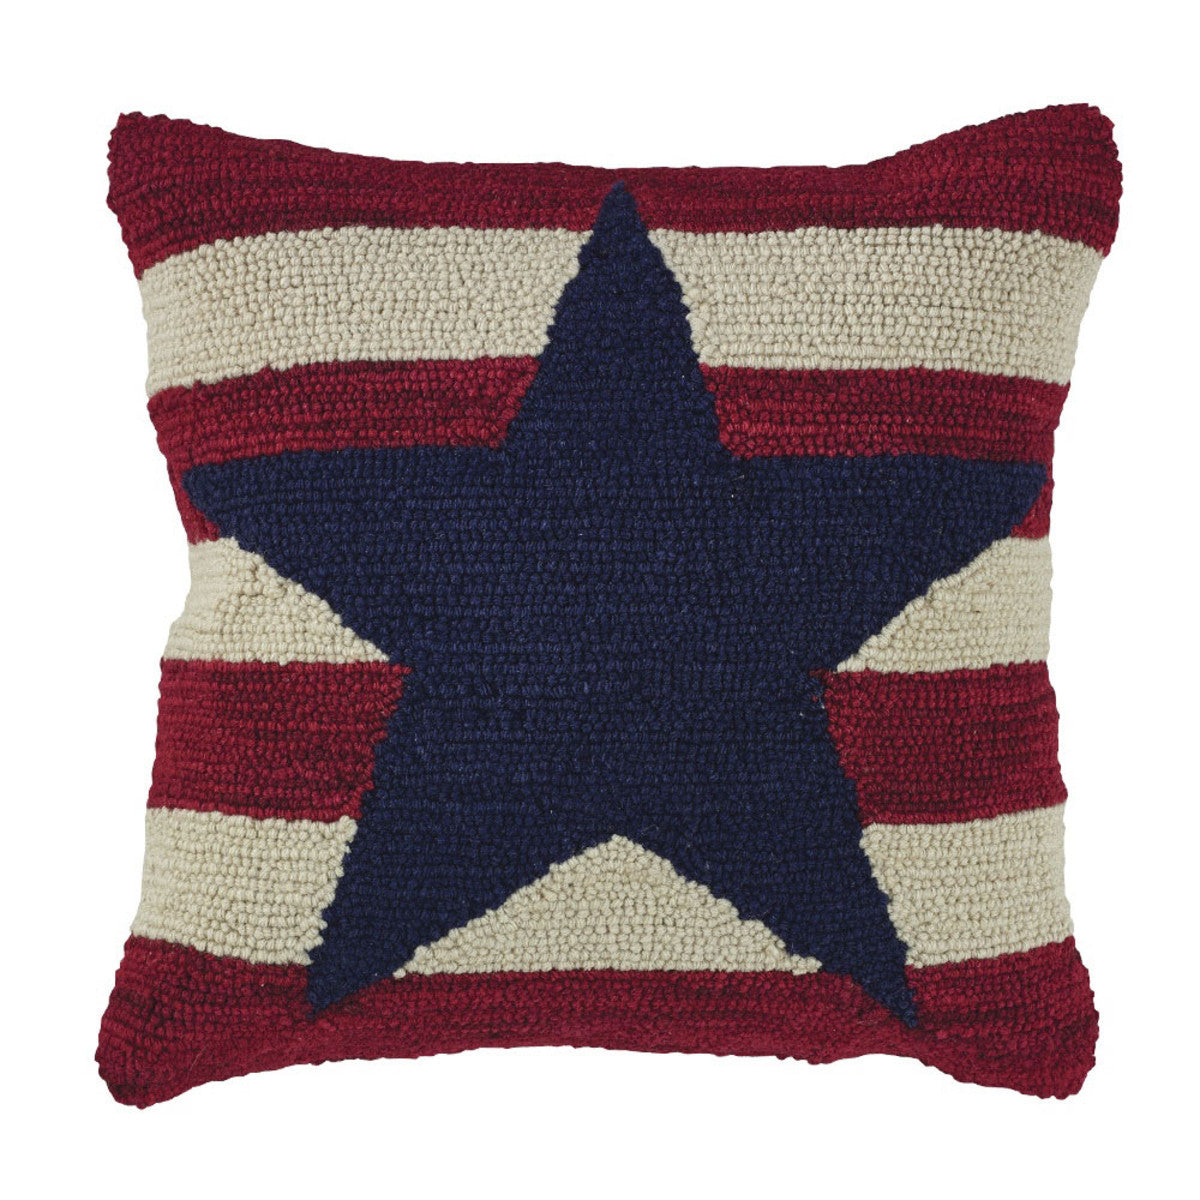 American Star Hooked Pillow Set Polyester Fill 18"x18" - Park Designs